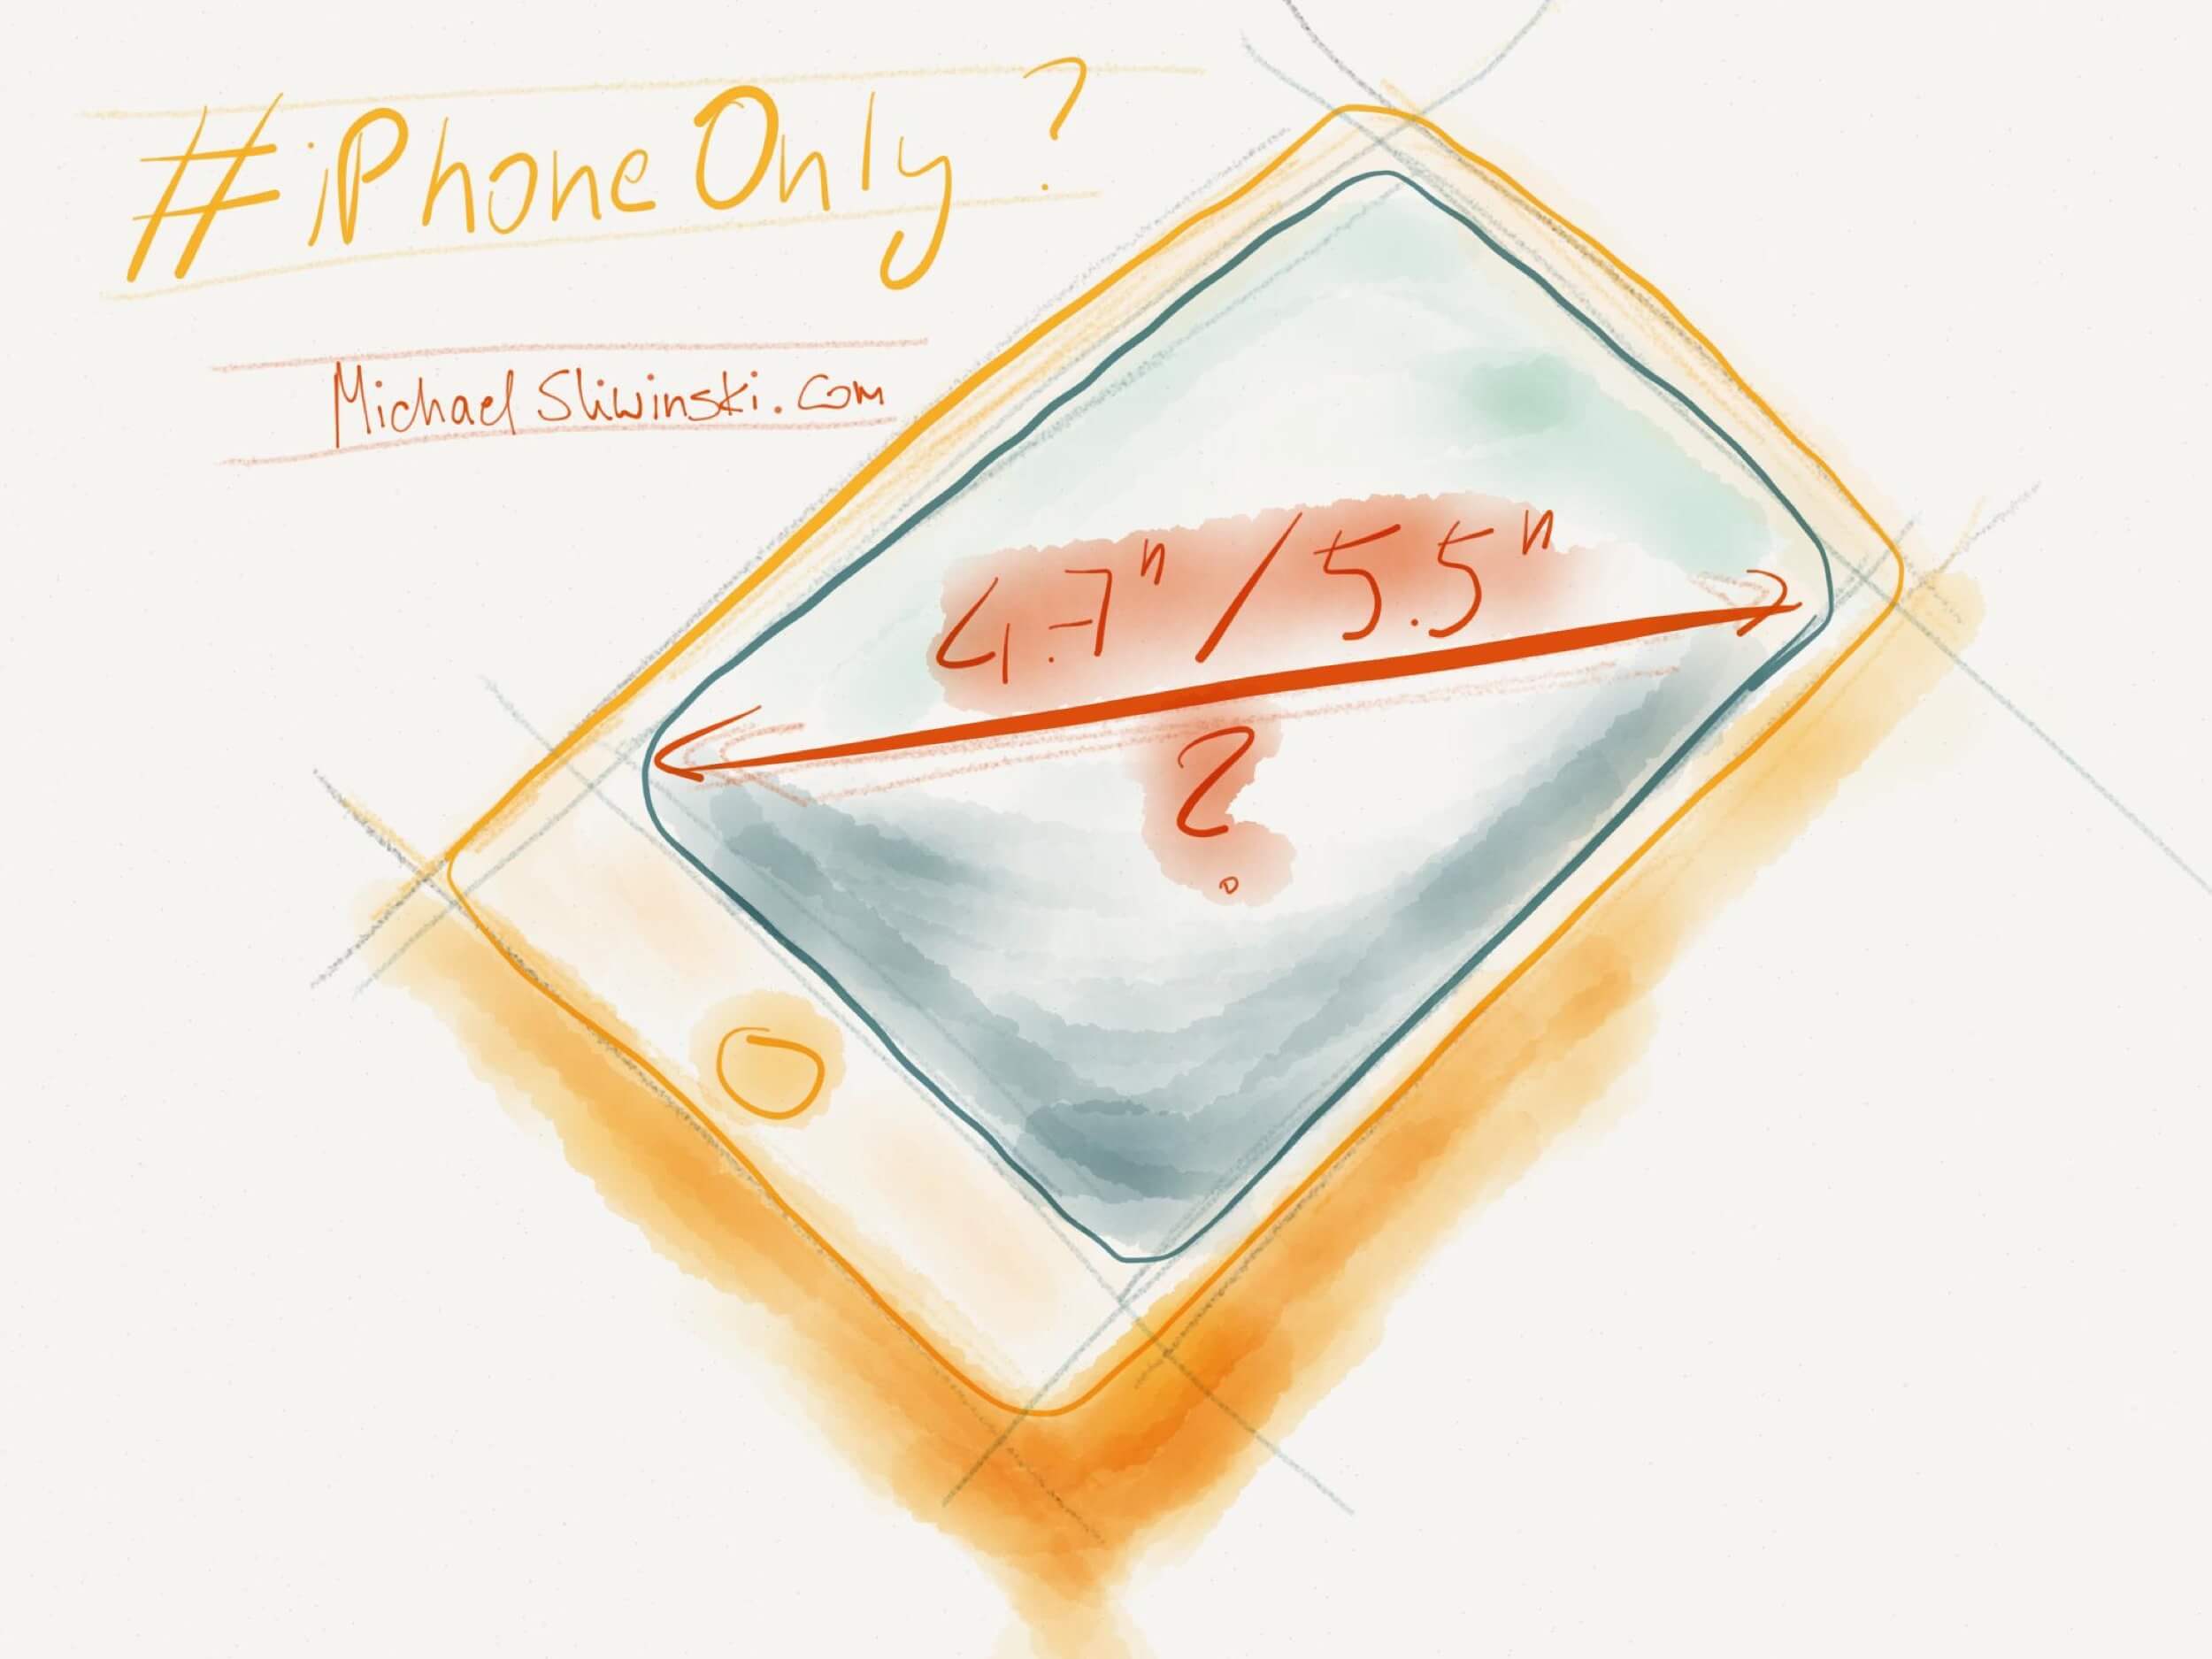 Will a new 5,5” iPhone convert people to not only #iPadOnly, but more #iPhoneOnly?